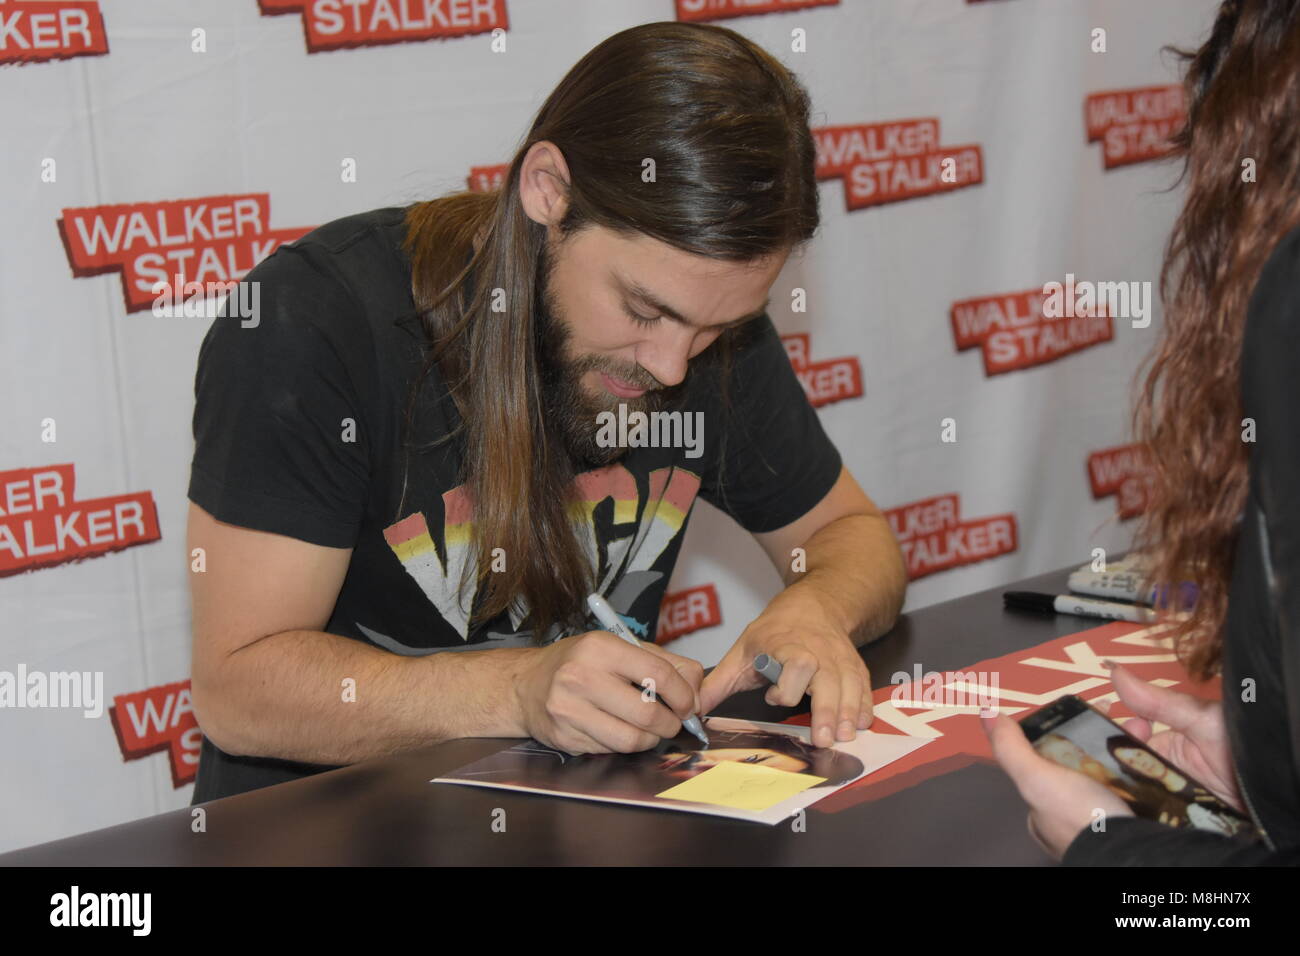 MANNHEIM, GERMANY - MARCH 17: Actor Tom Payne (Jesus on The Walking Dead) at the Walker Stalker Germany convention. (Photo by Markus Wissmann) Stock Photo